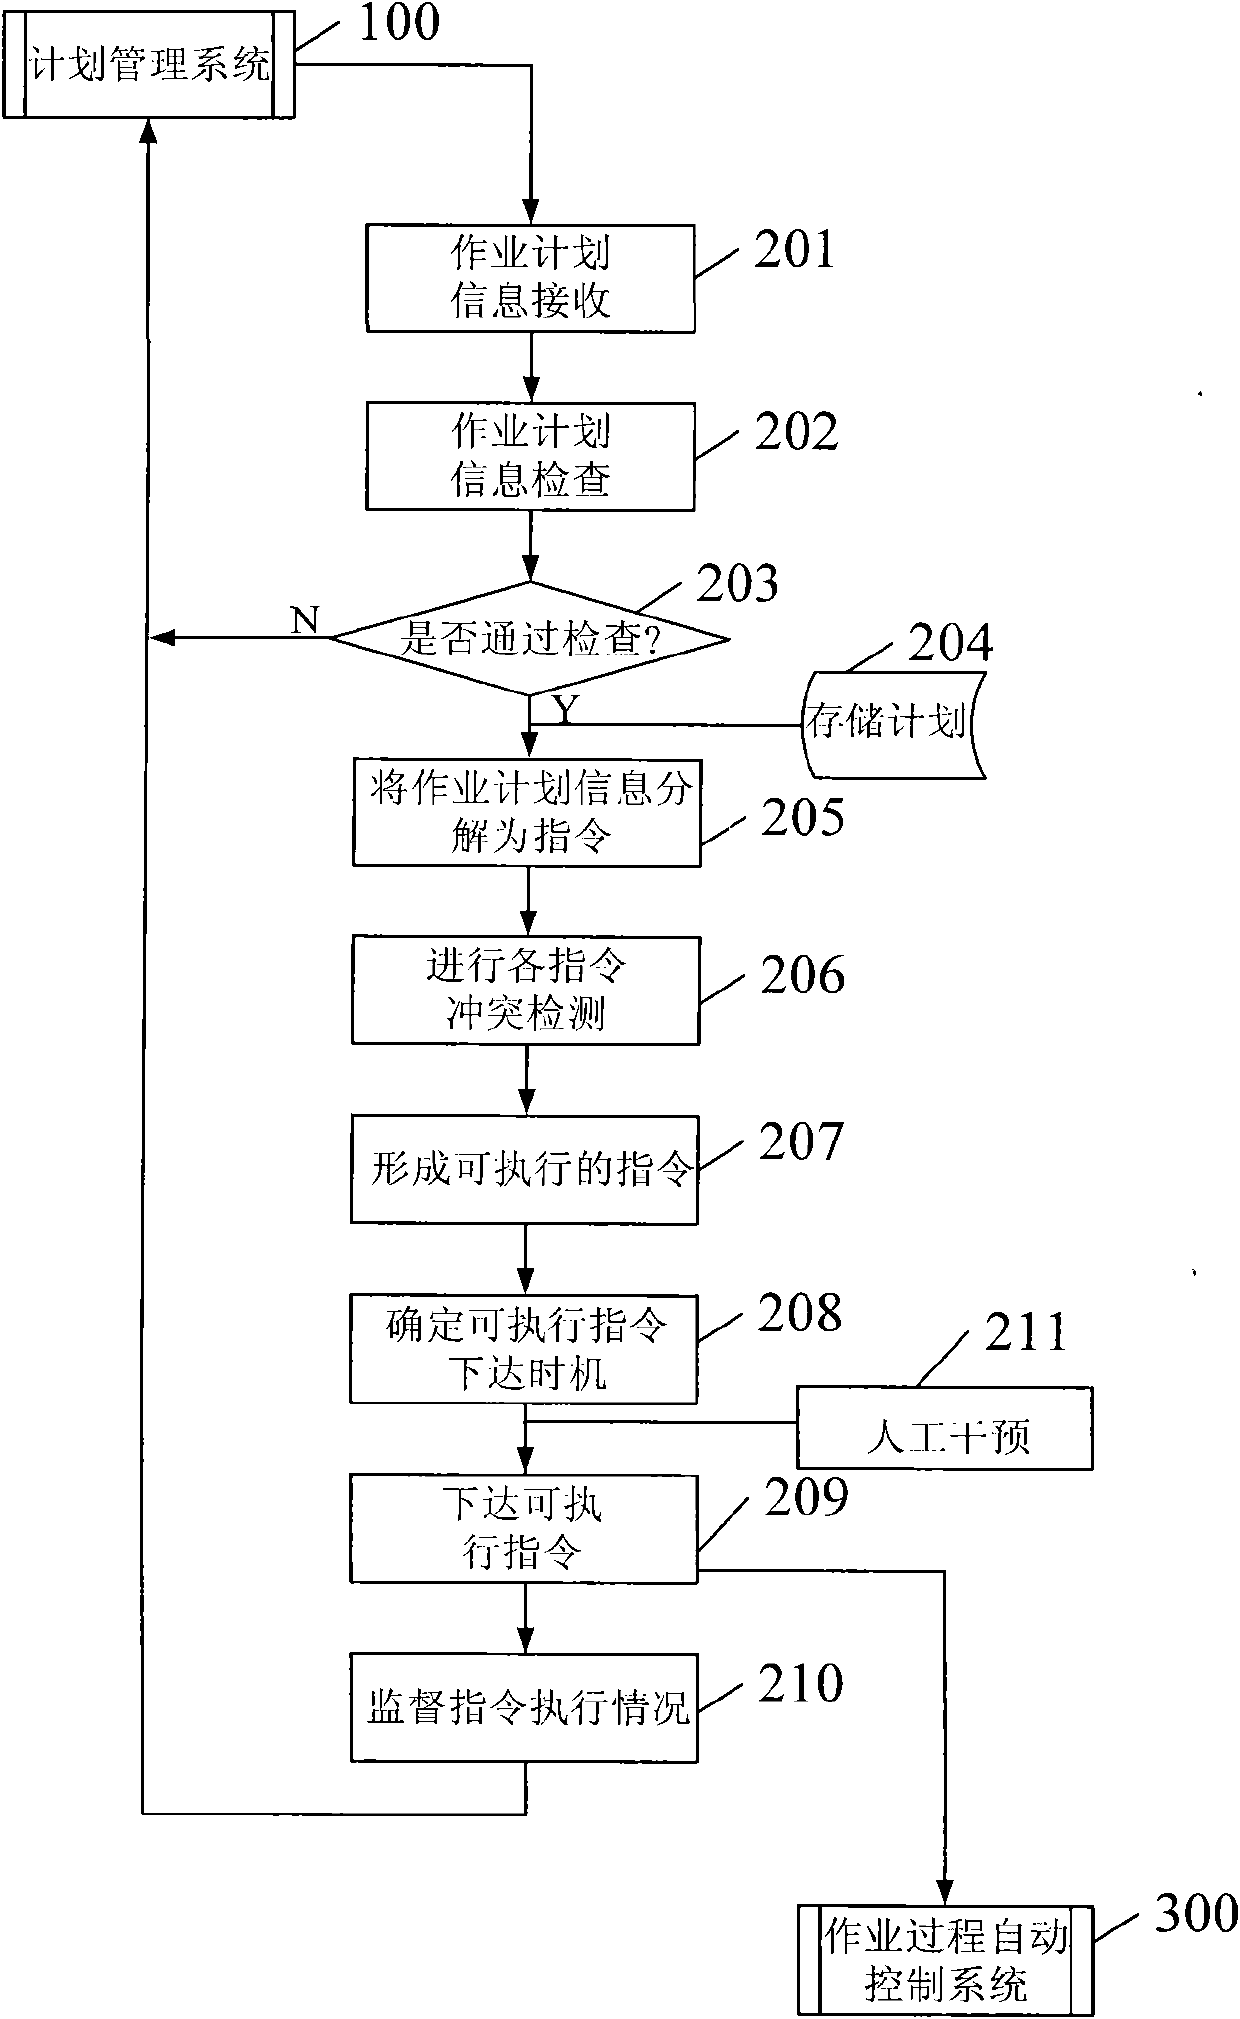 Control method combining management and control and system